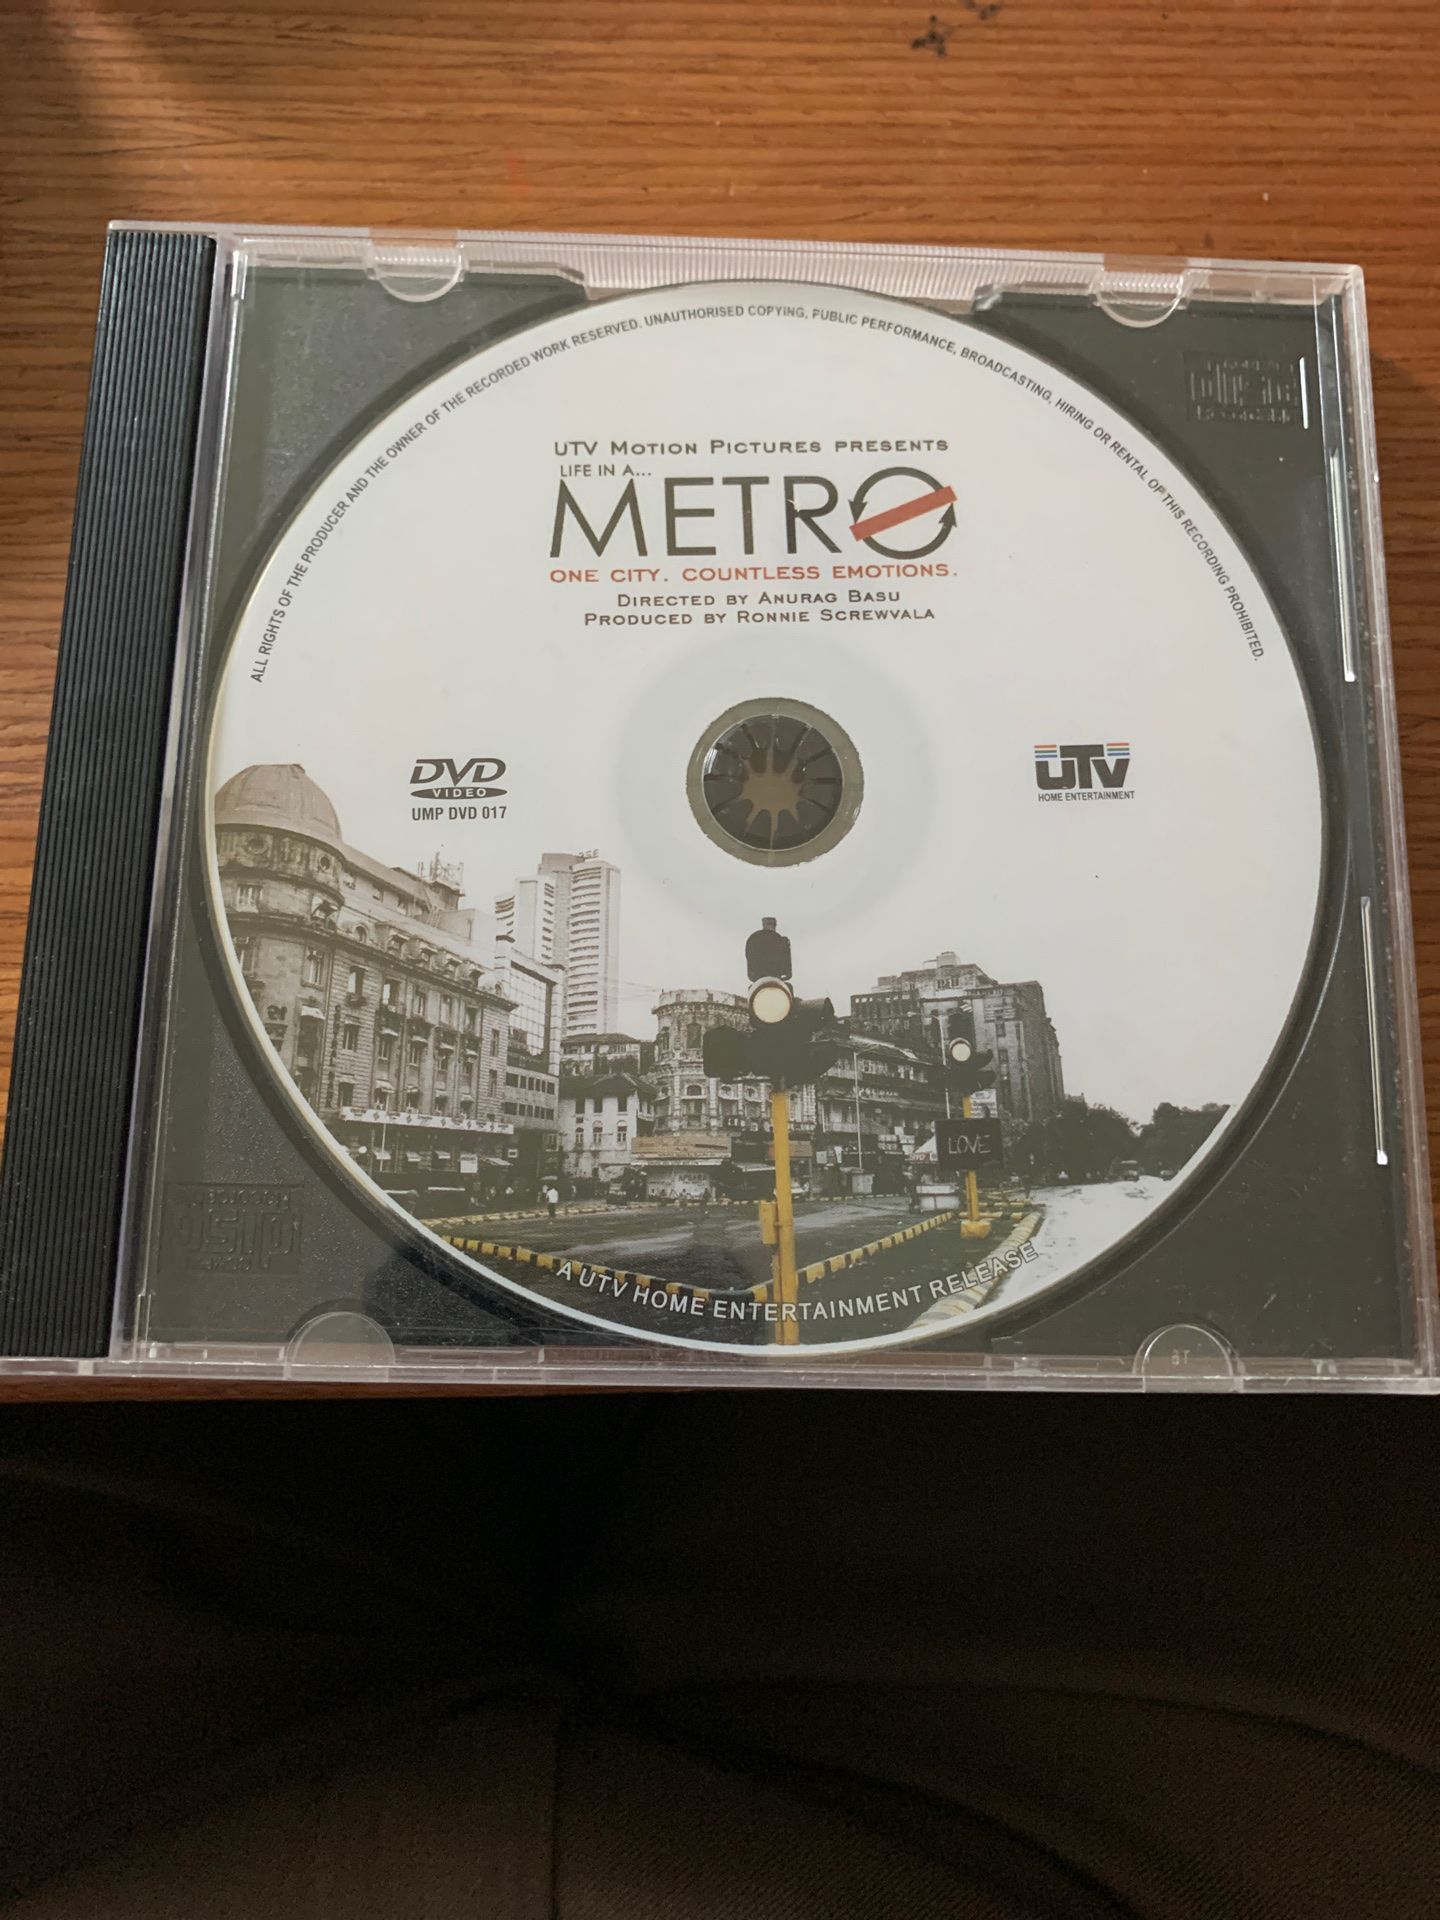 Free DVD of Hindi/ Bollywood Movie “Metro” - One City Countless Emotions